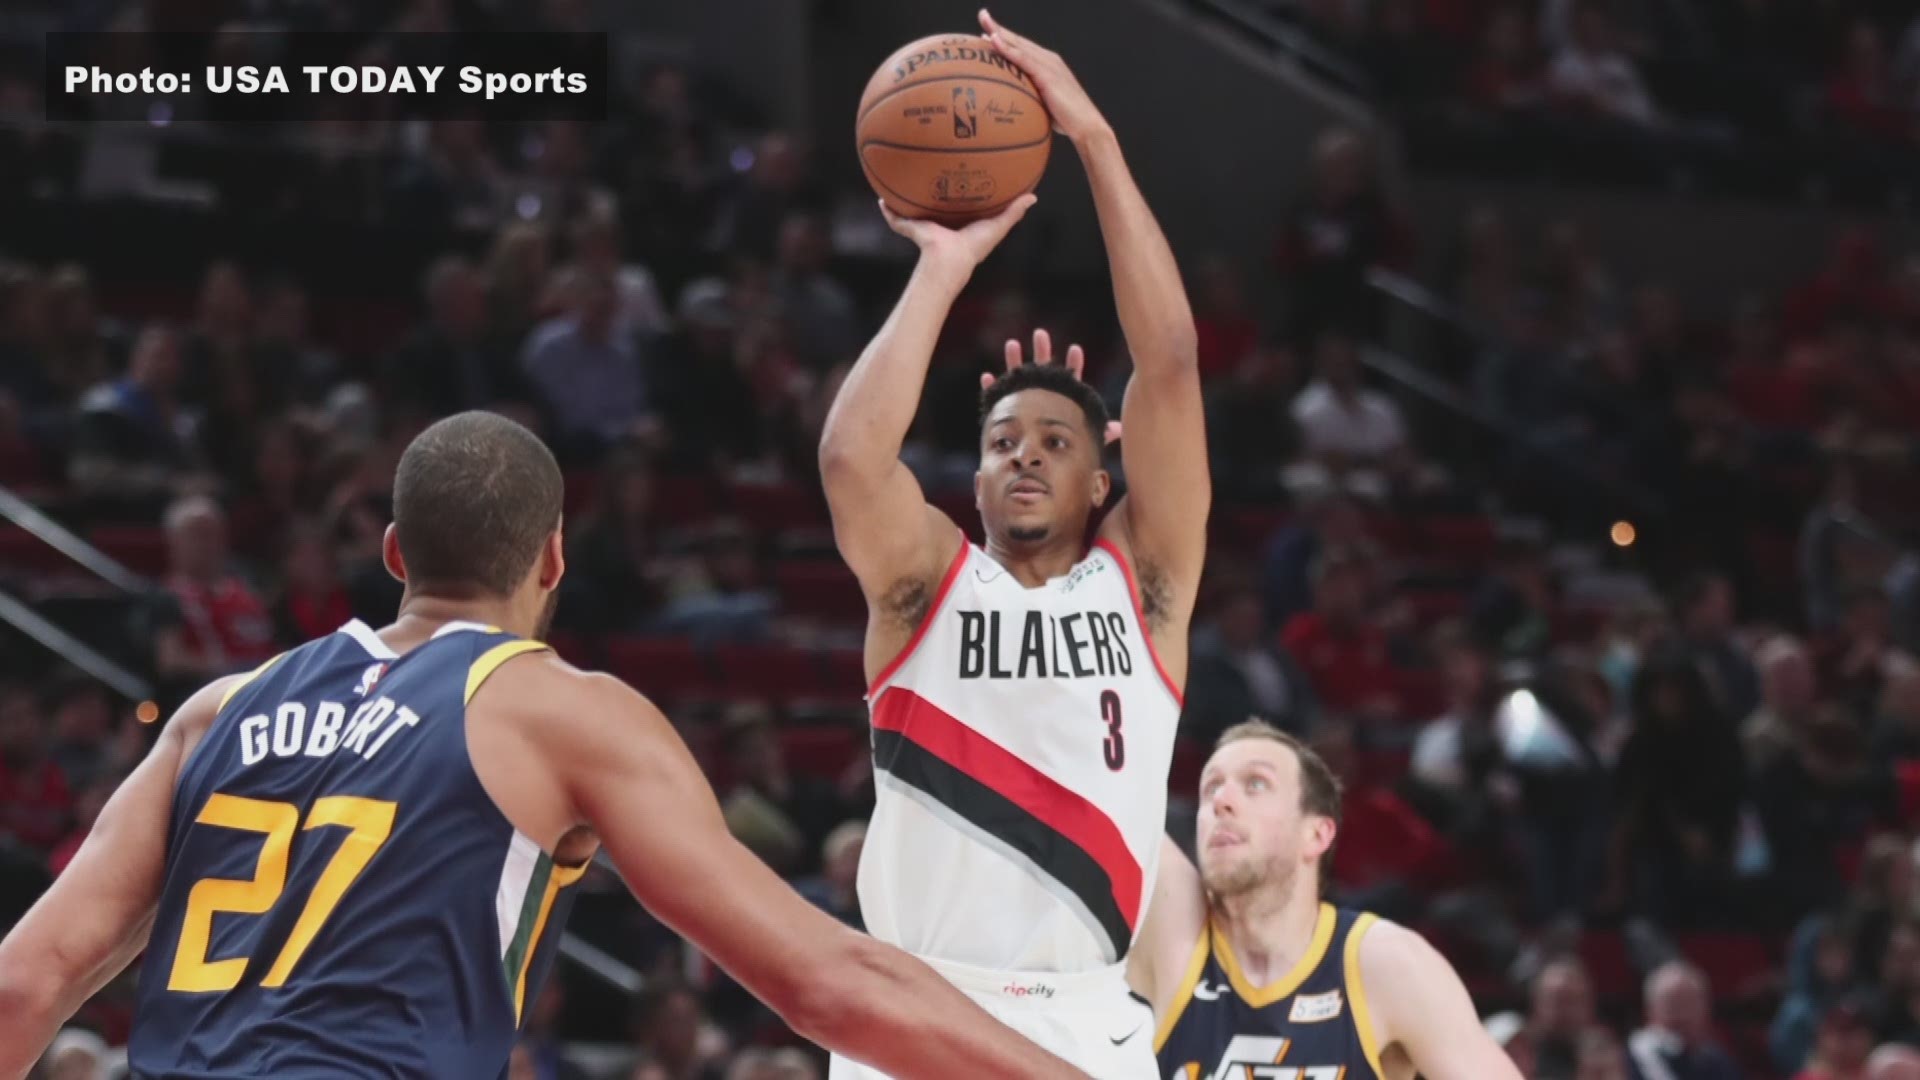 KGW's Orlando Sanchez, Nate Hanson and Jared Cowley welcomed guest Mila Mimica to the podcast to talk about the All-Star chances of CJ McCollum, the greatness of Damian Lillard and more.

We went heavy on CJ and Nurk in this week's 3-on-3 Blazers podcas